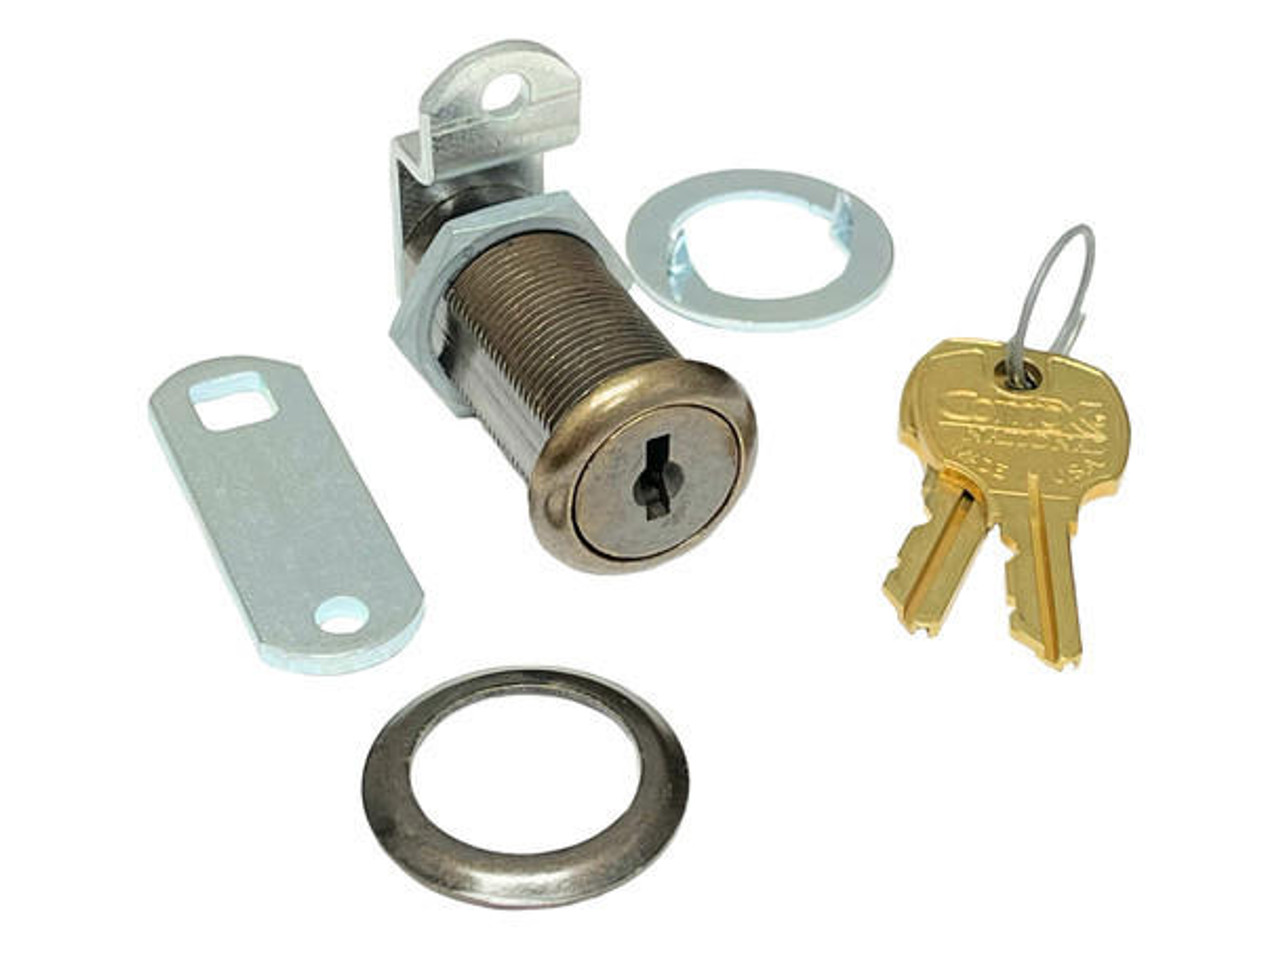 Compx Security Products Compx C8053 disc tumbler cylinder cam lock 